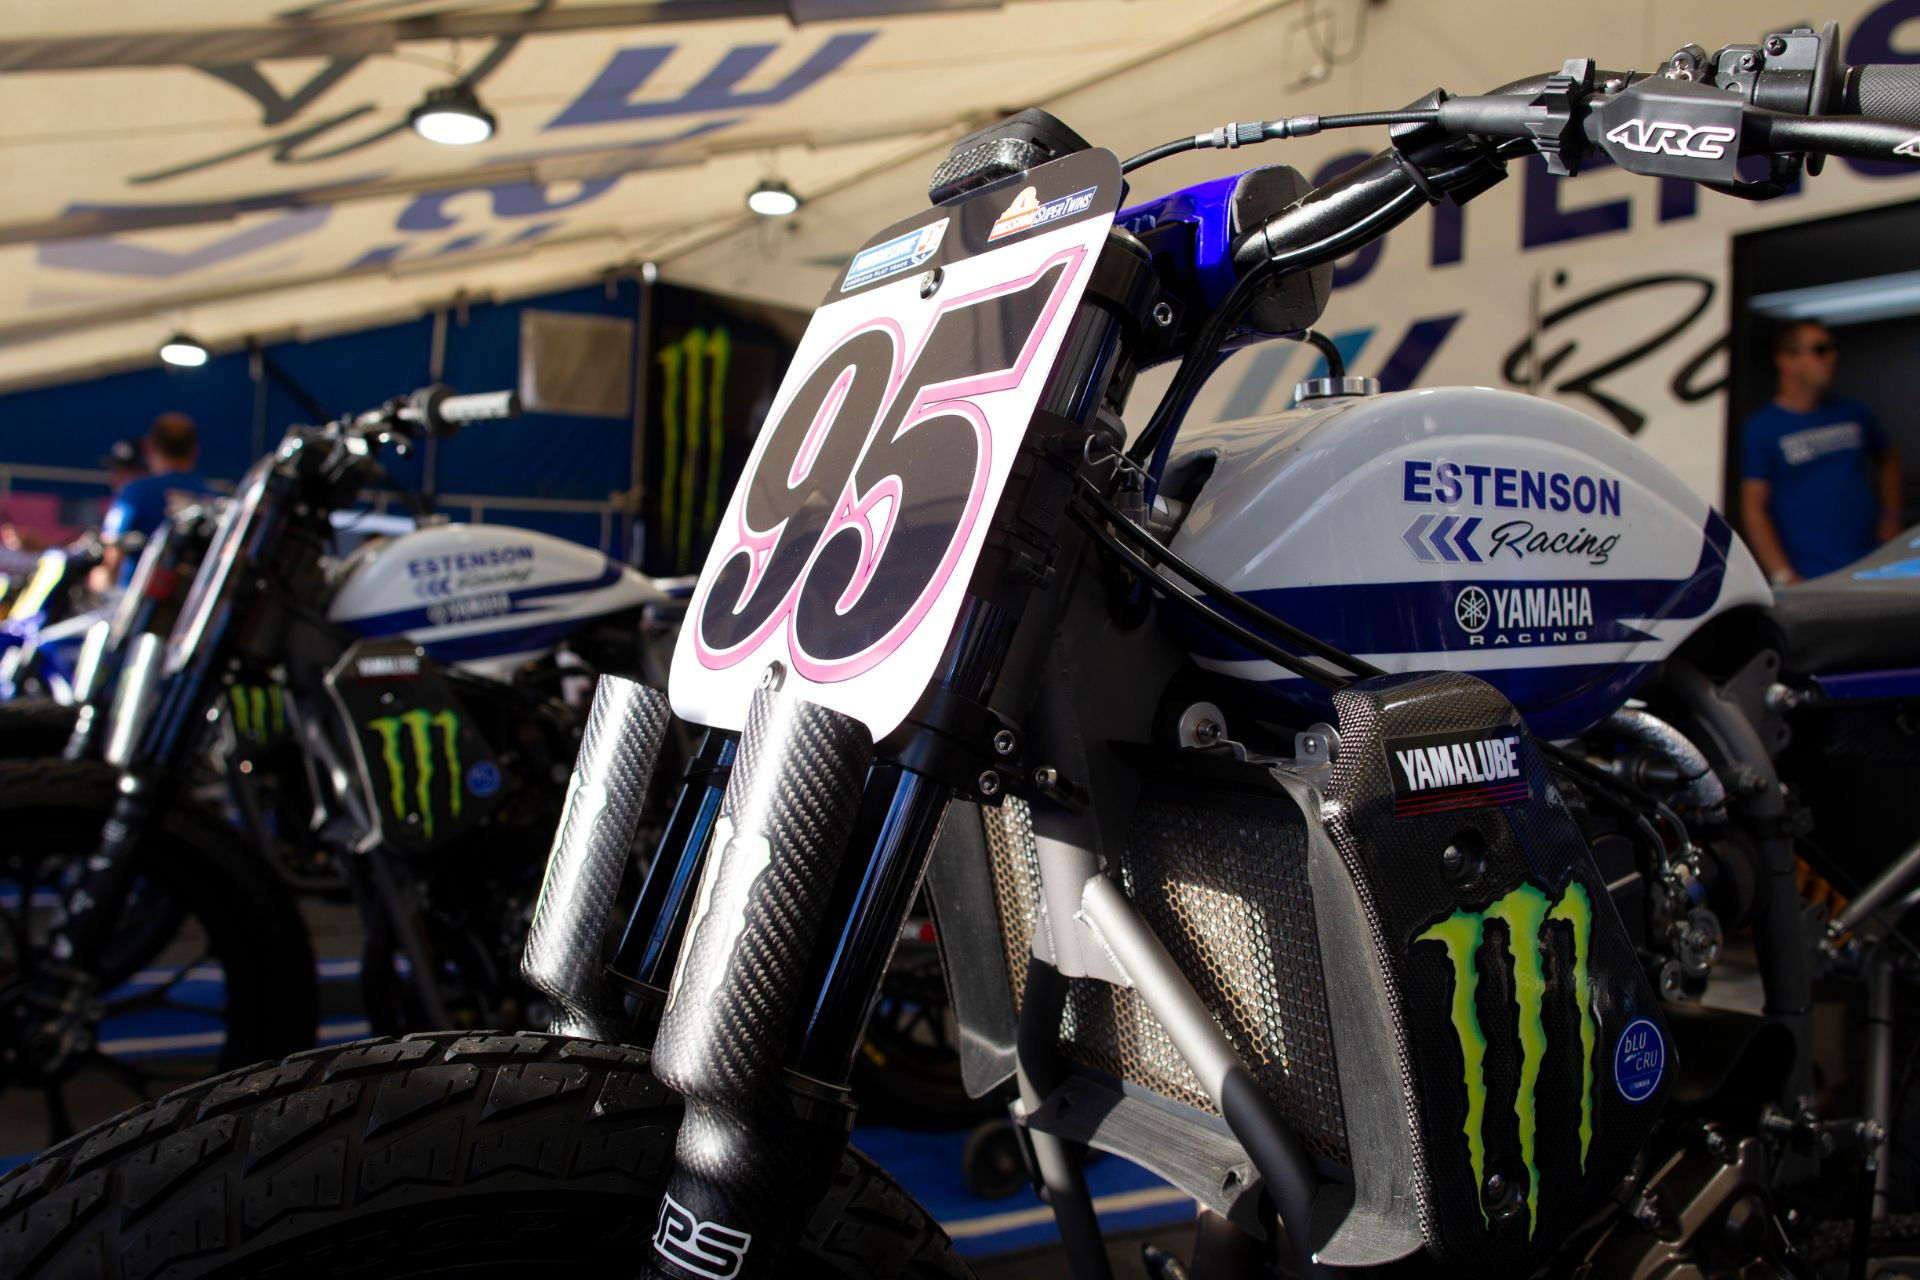 Estenson Racing has announced its rider lineup for the 2022 American Flat Track Championships. Photo courtesy Yamaha.